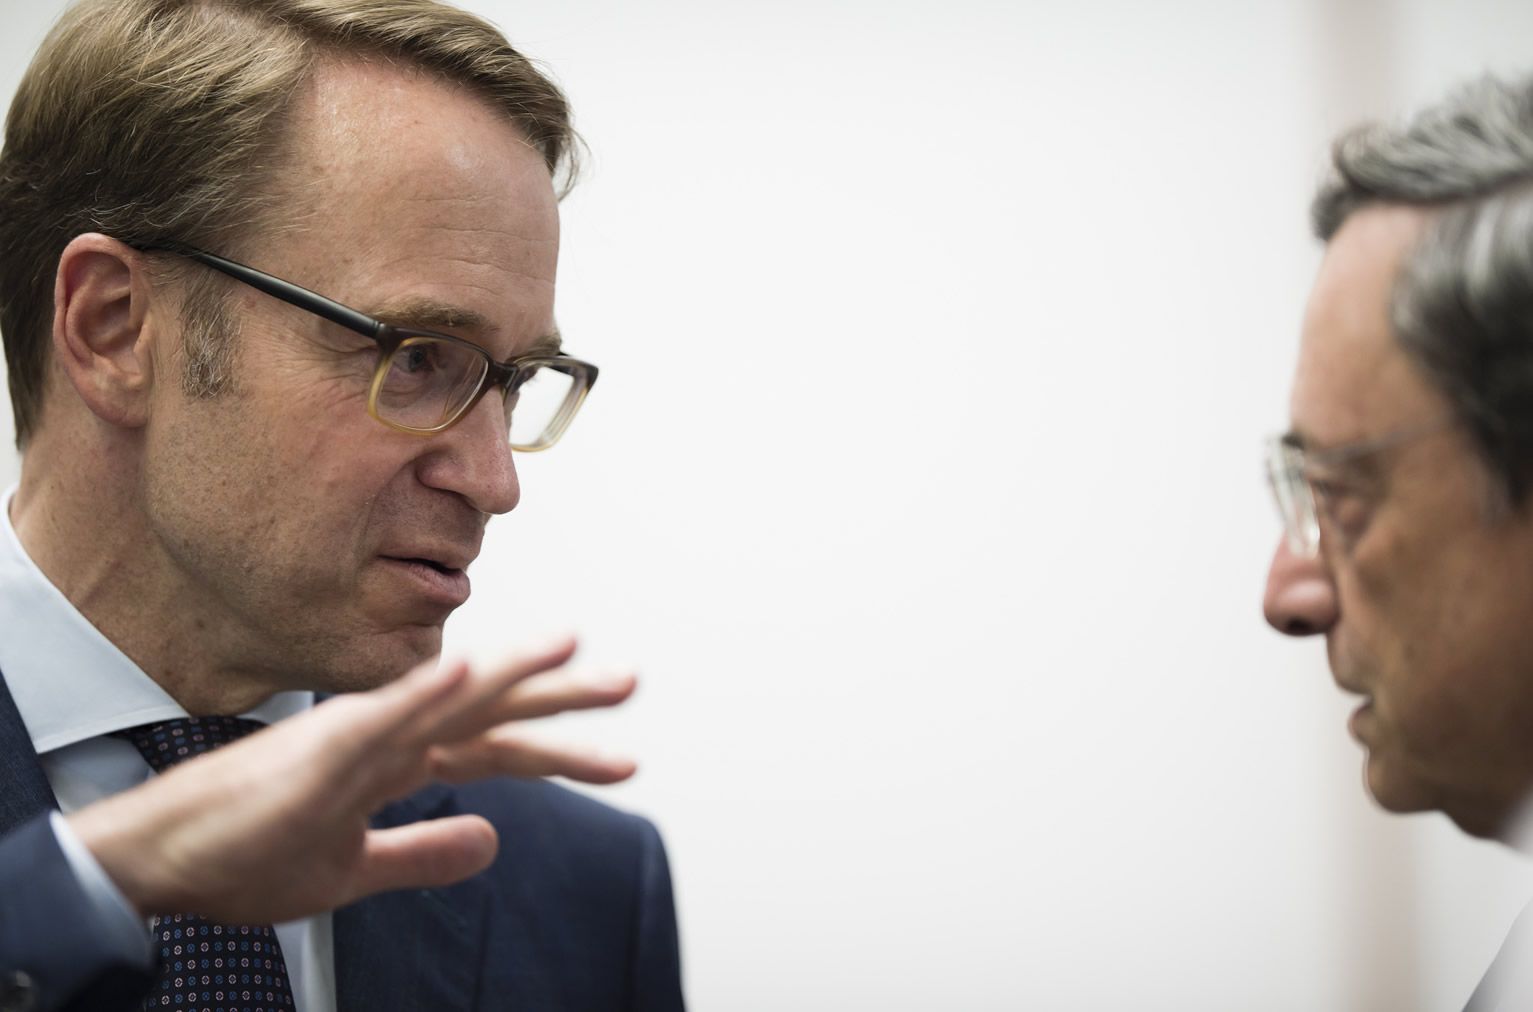 Euro-to-Dollar Rate in Sudden Overnight Surge, Weidmann Makes the Case ...